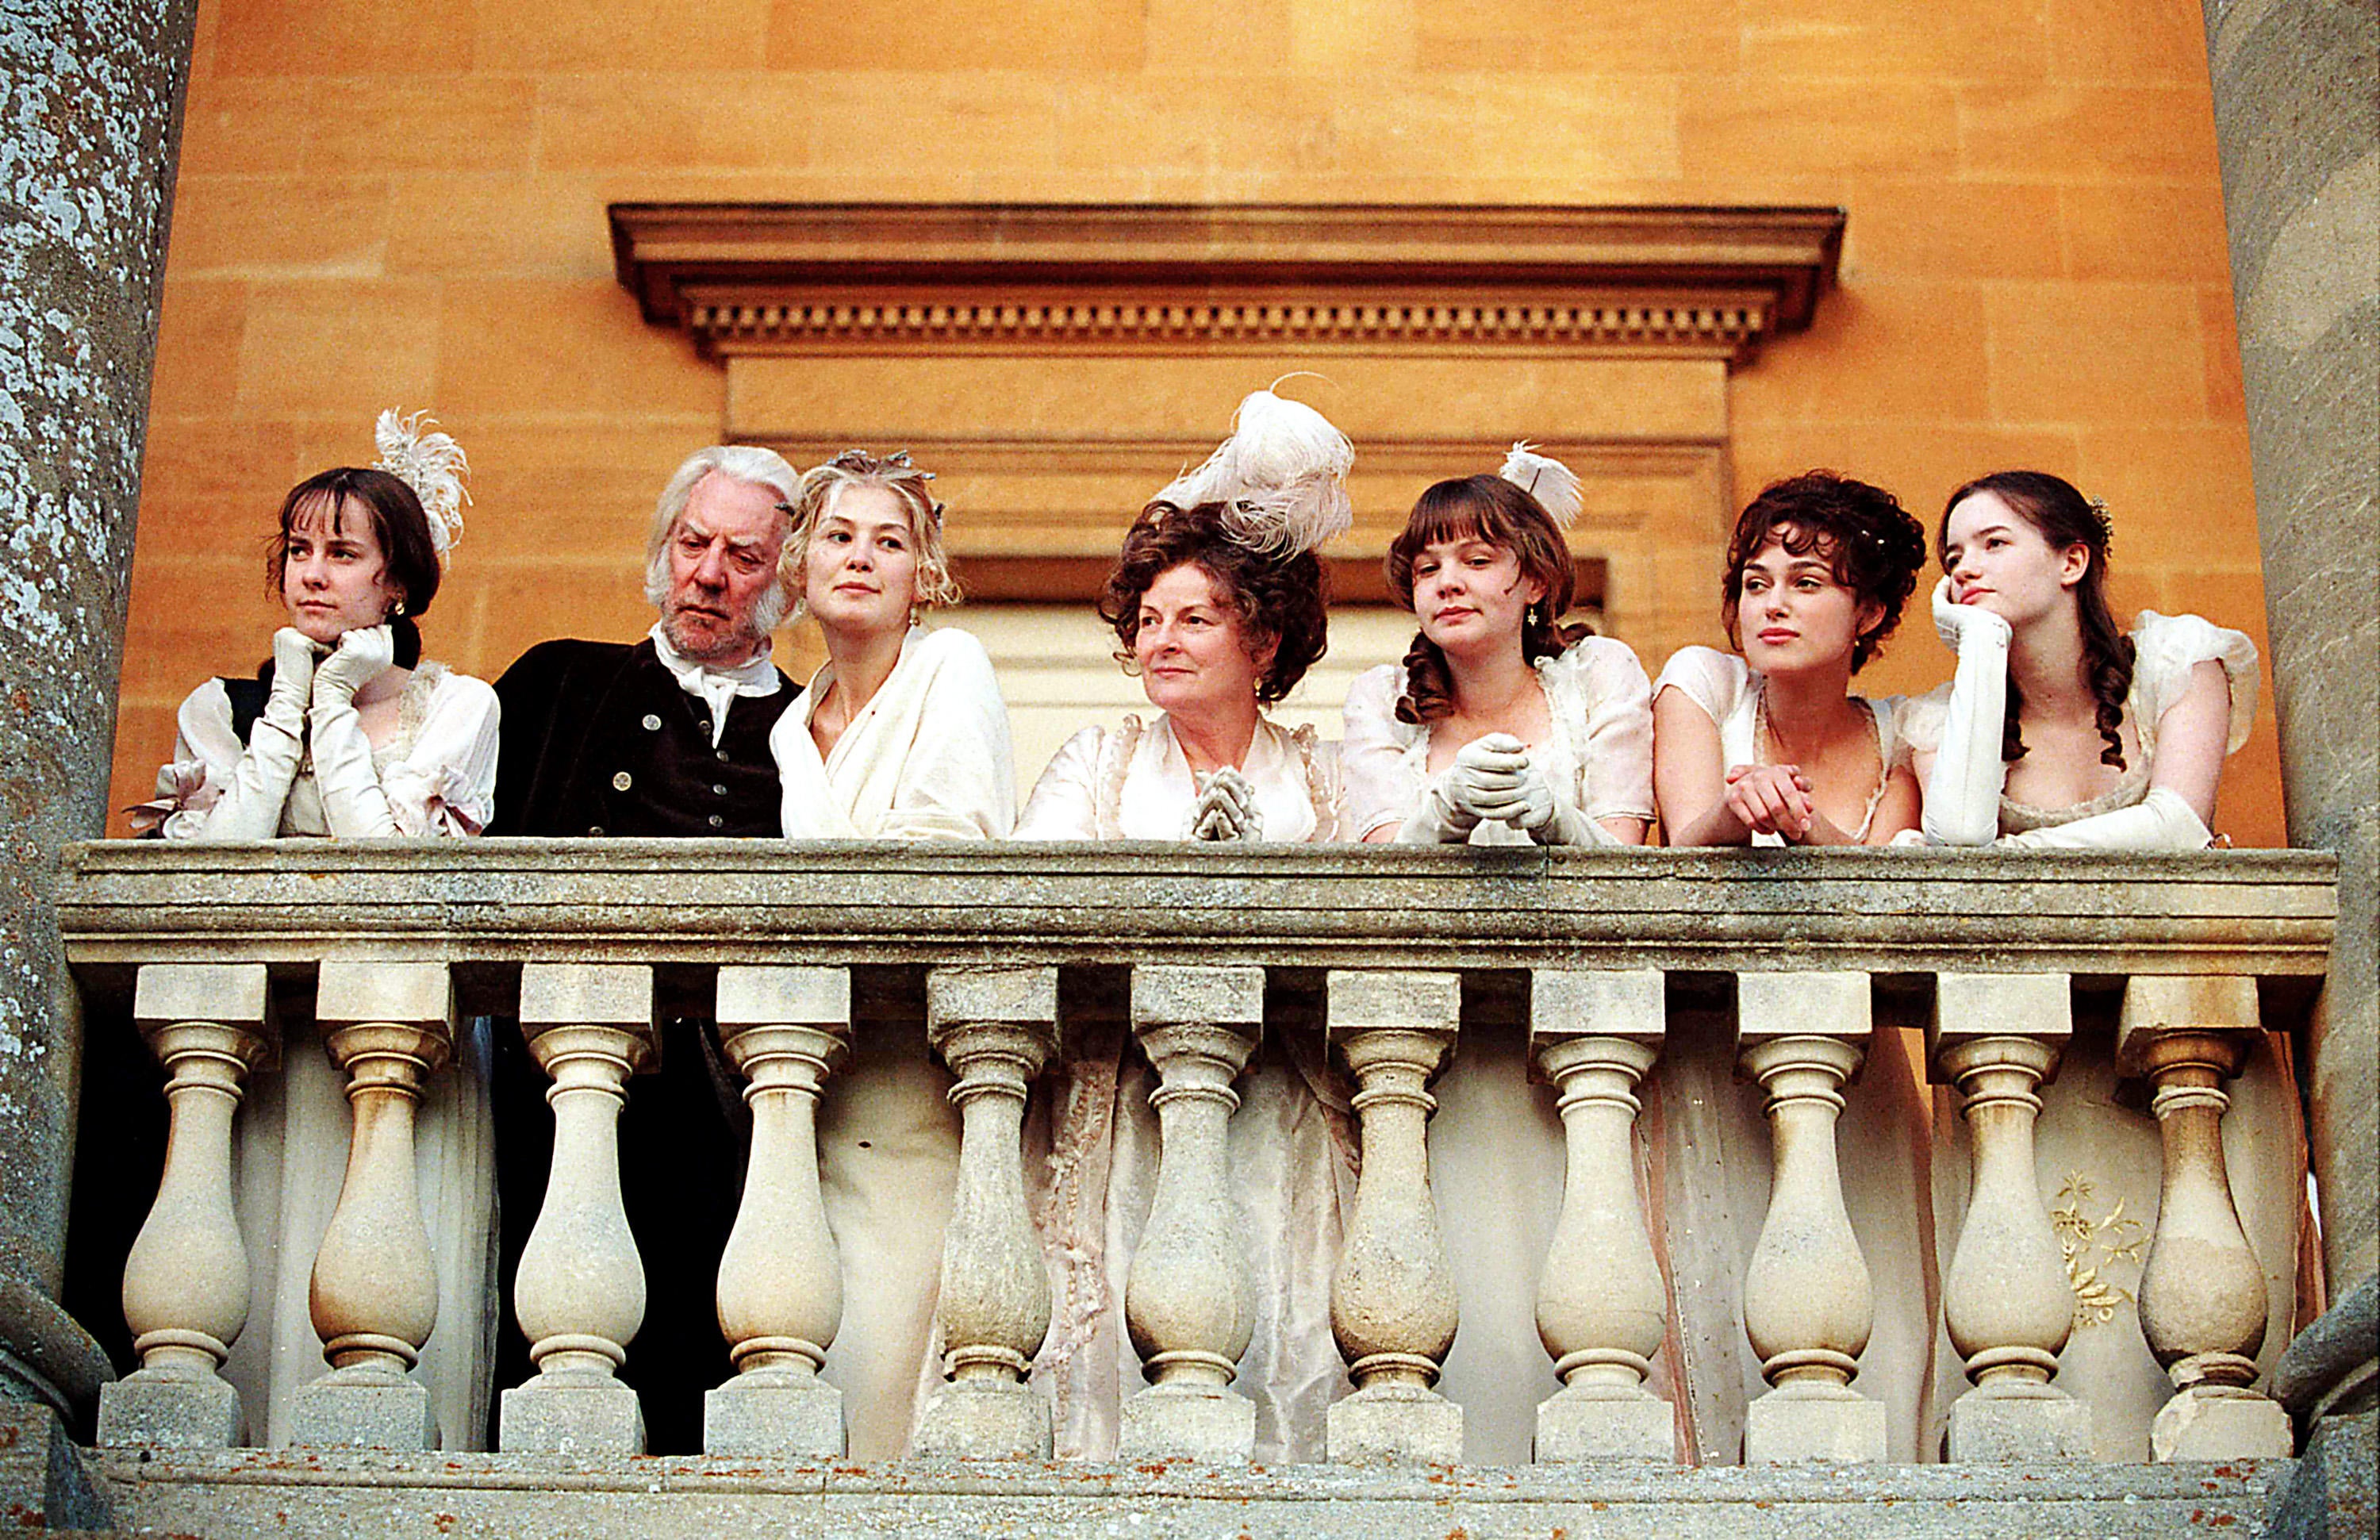 Sutherland with (from left) Jena Malone, Rosamund Pike, Brenda Blethyn, Carey Mulligan, Keira Knightley and Tallulah Riley in ‘Pride & Prejudice’